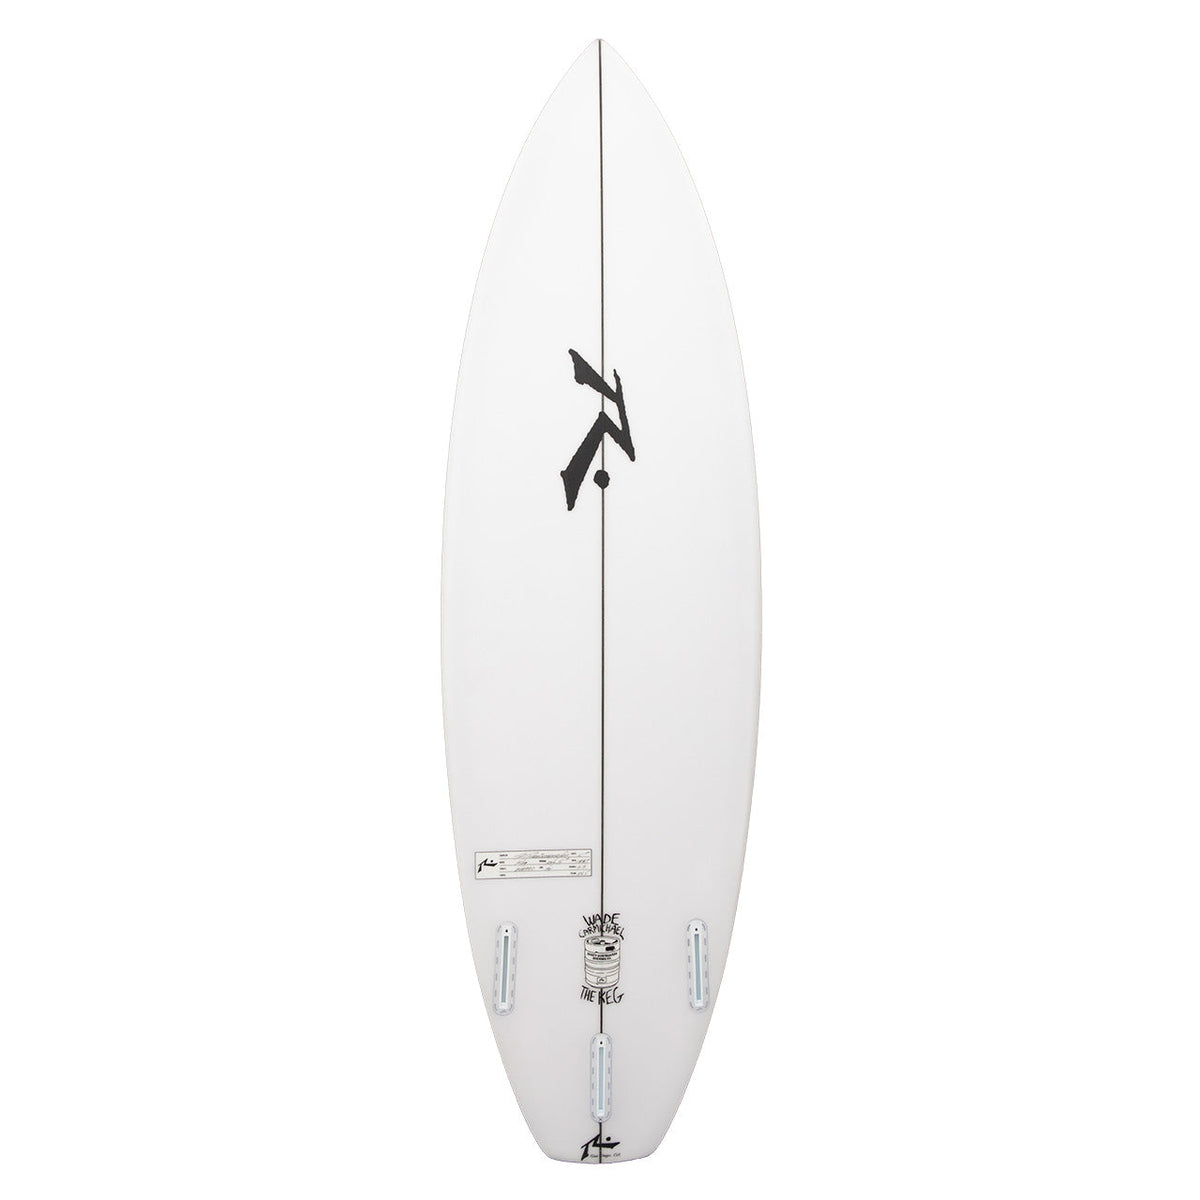 The Keg - High Performance Shortboard - In Stock - Bottom View - Rusty Surfboards